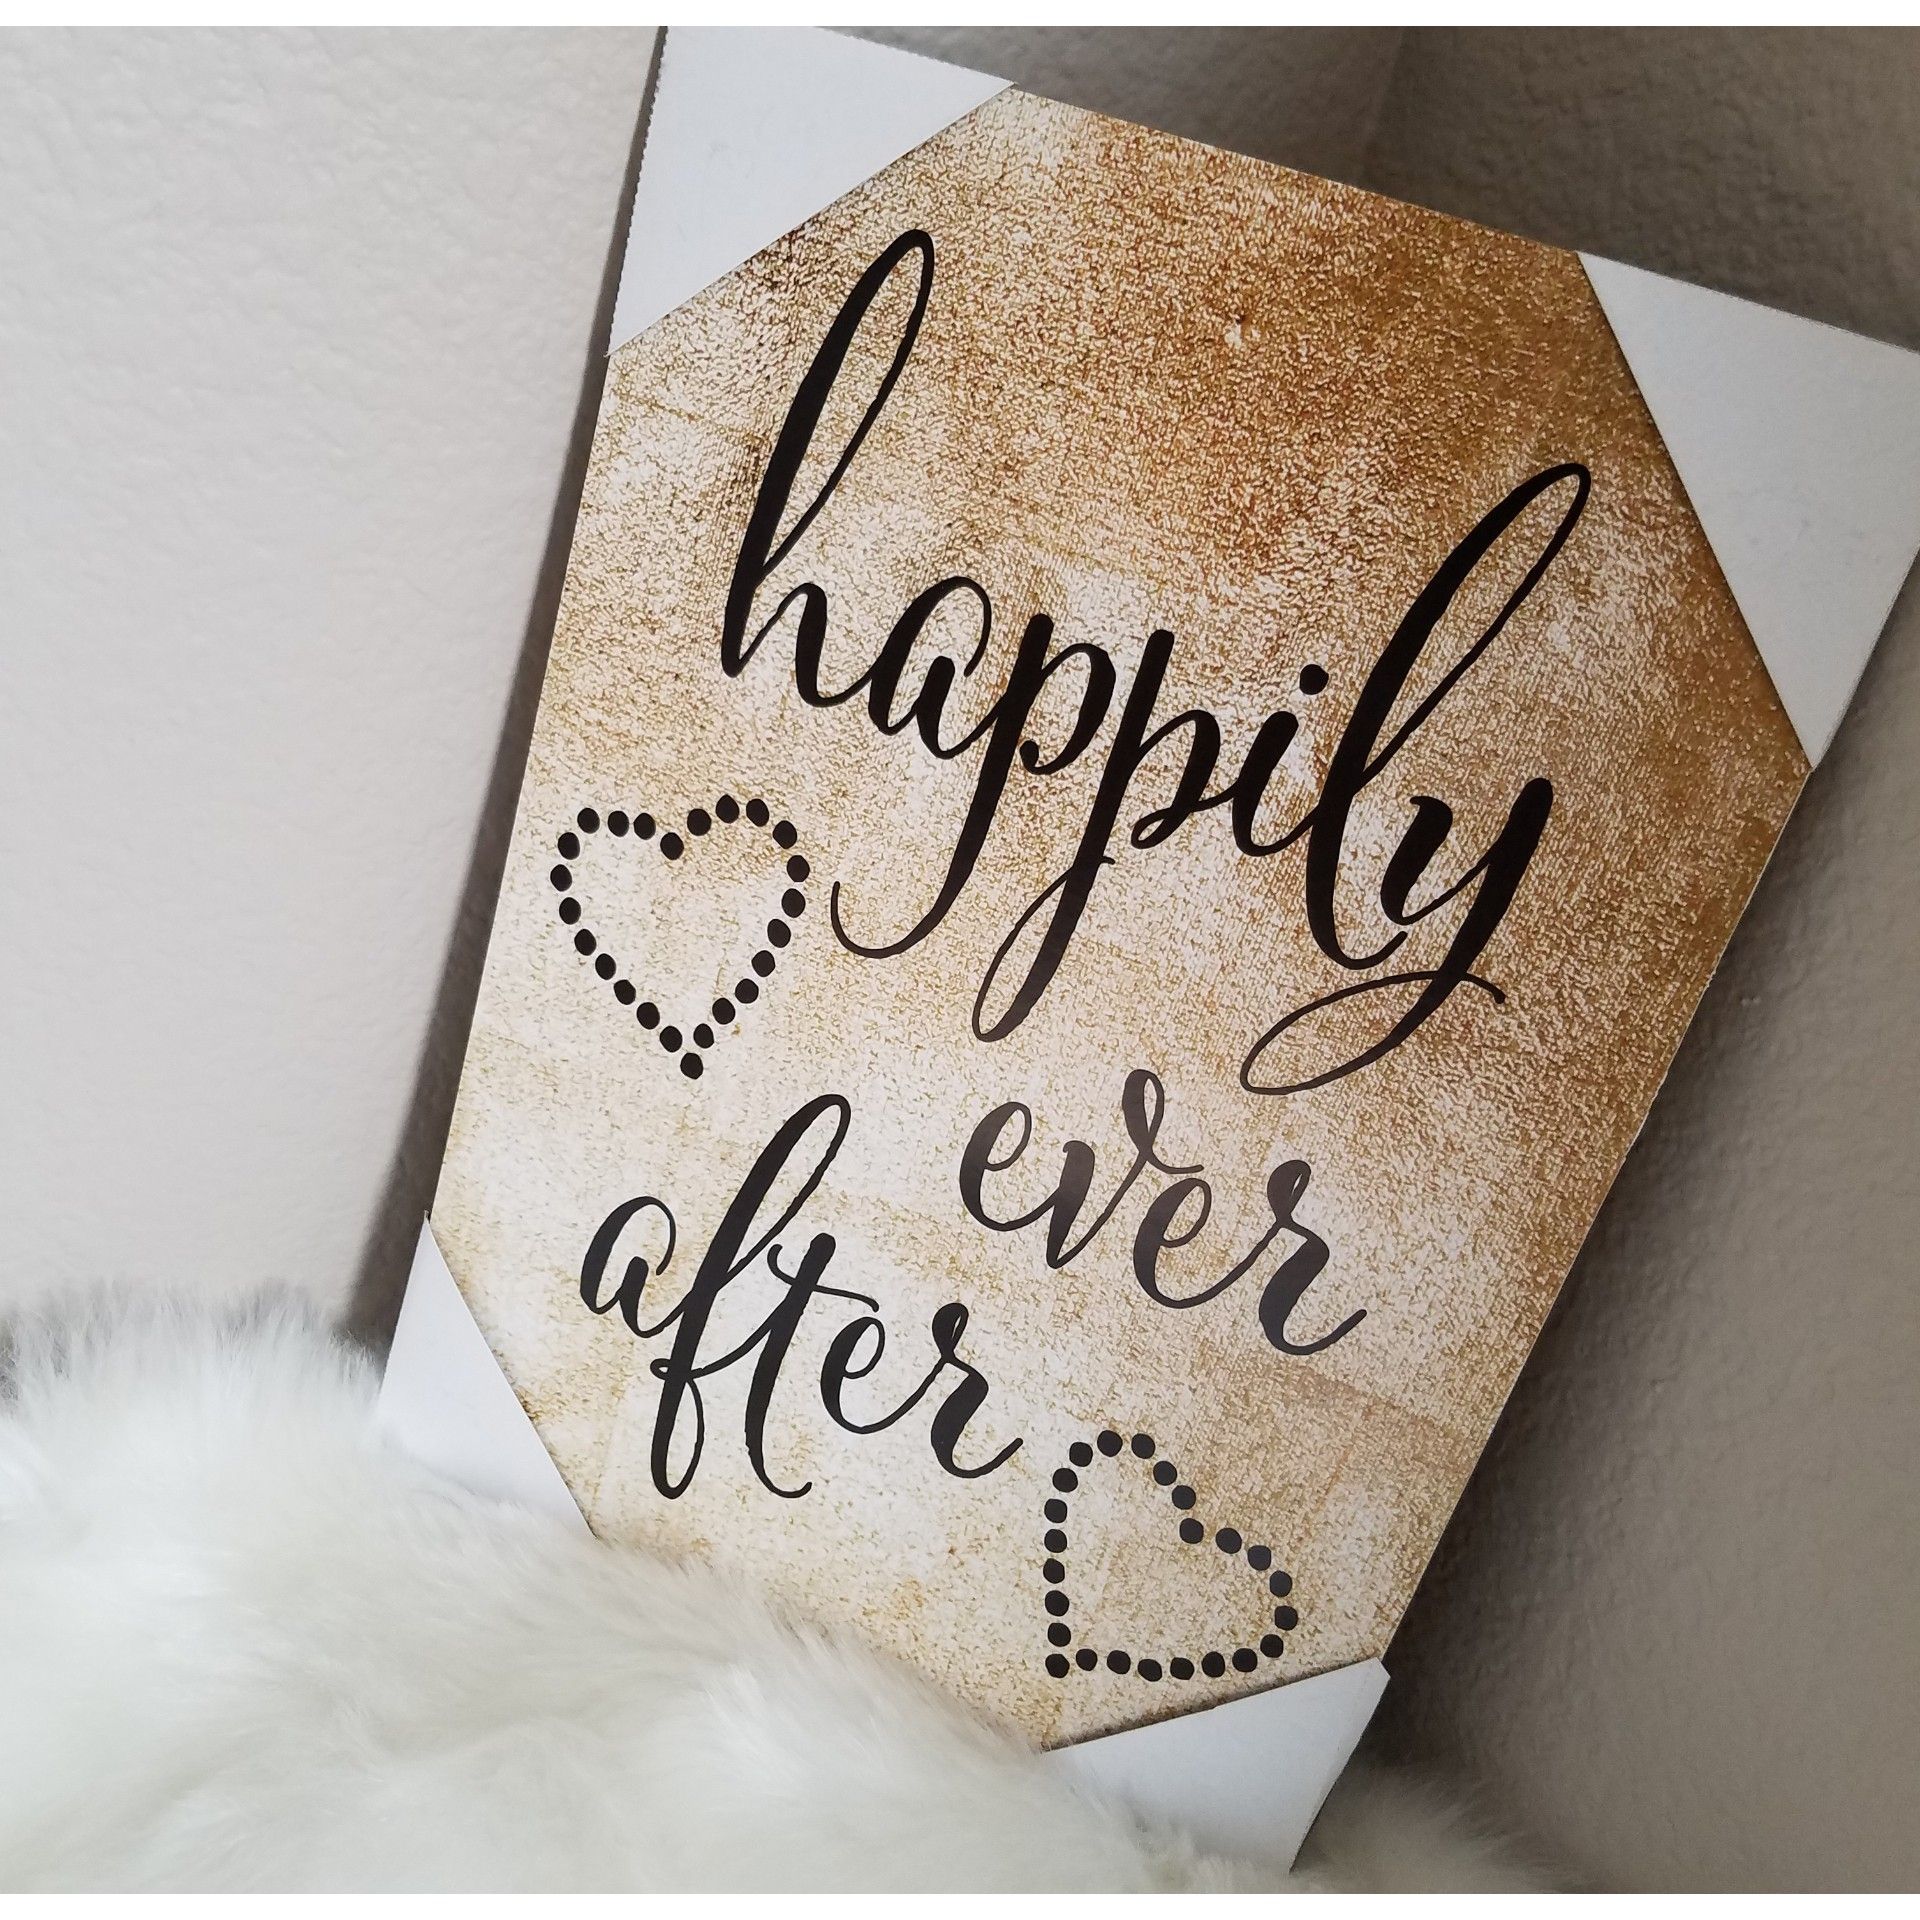 New happily ever after sign